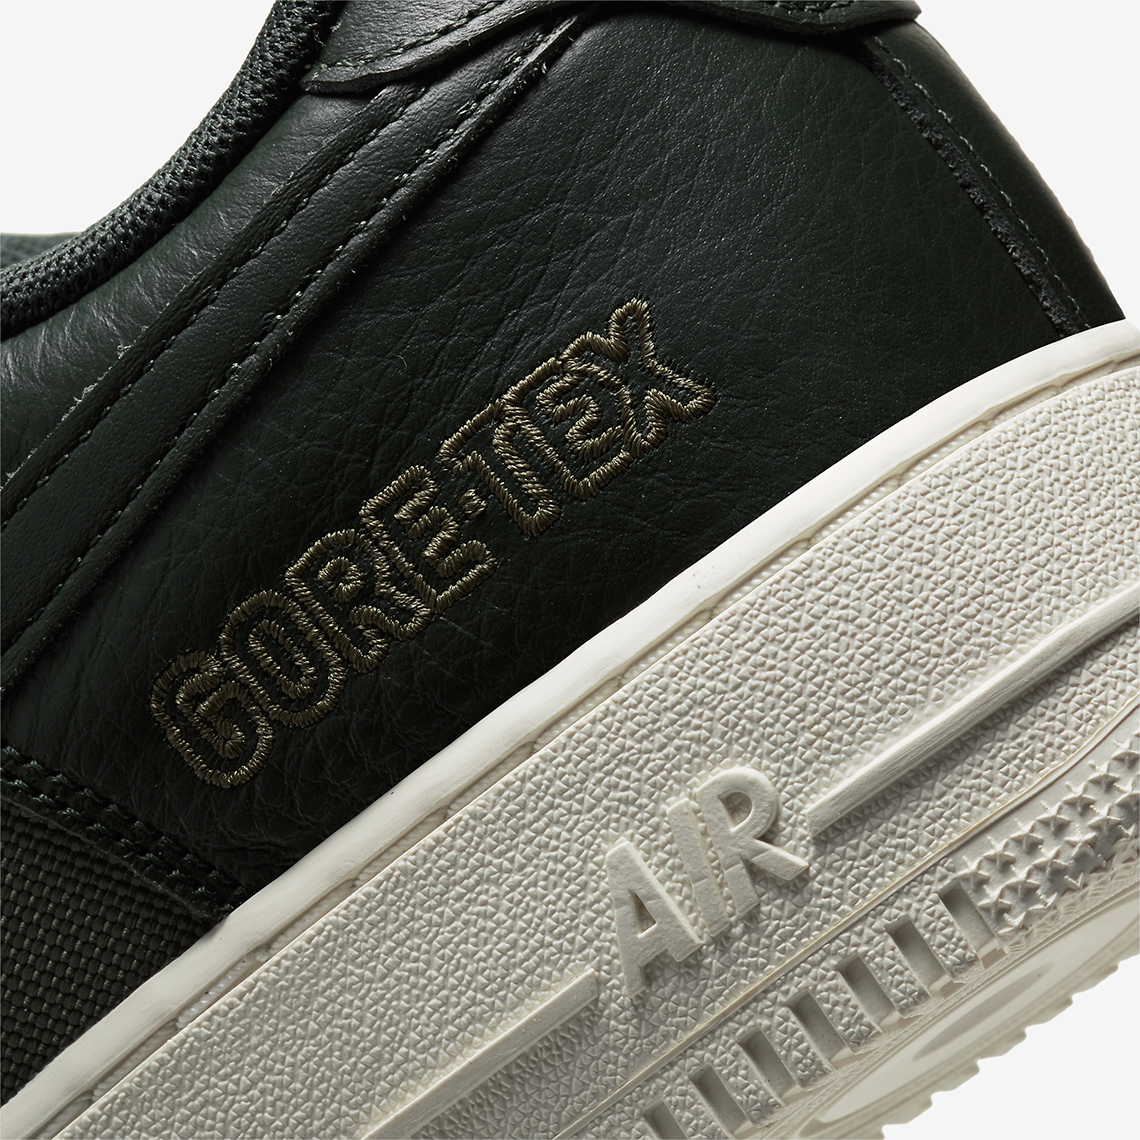 Nike Air Force 1 GORE-TEX CT2858-200 Release Info | SneakerNews.com